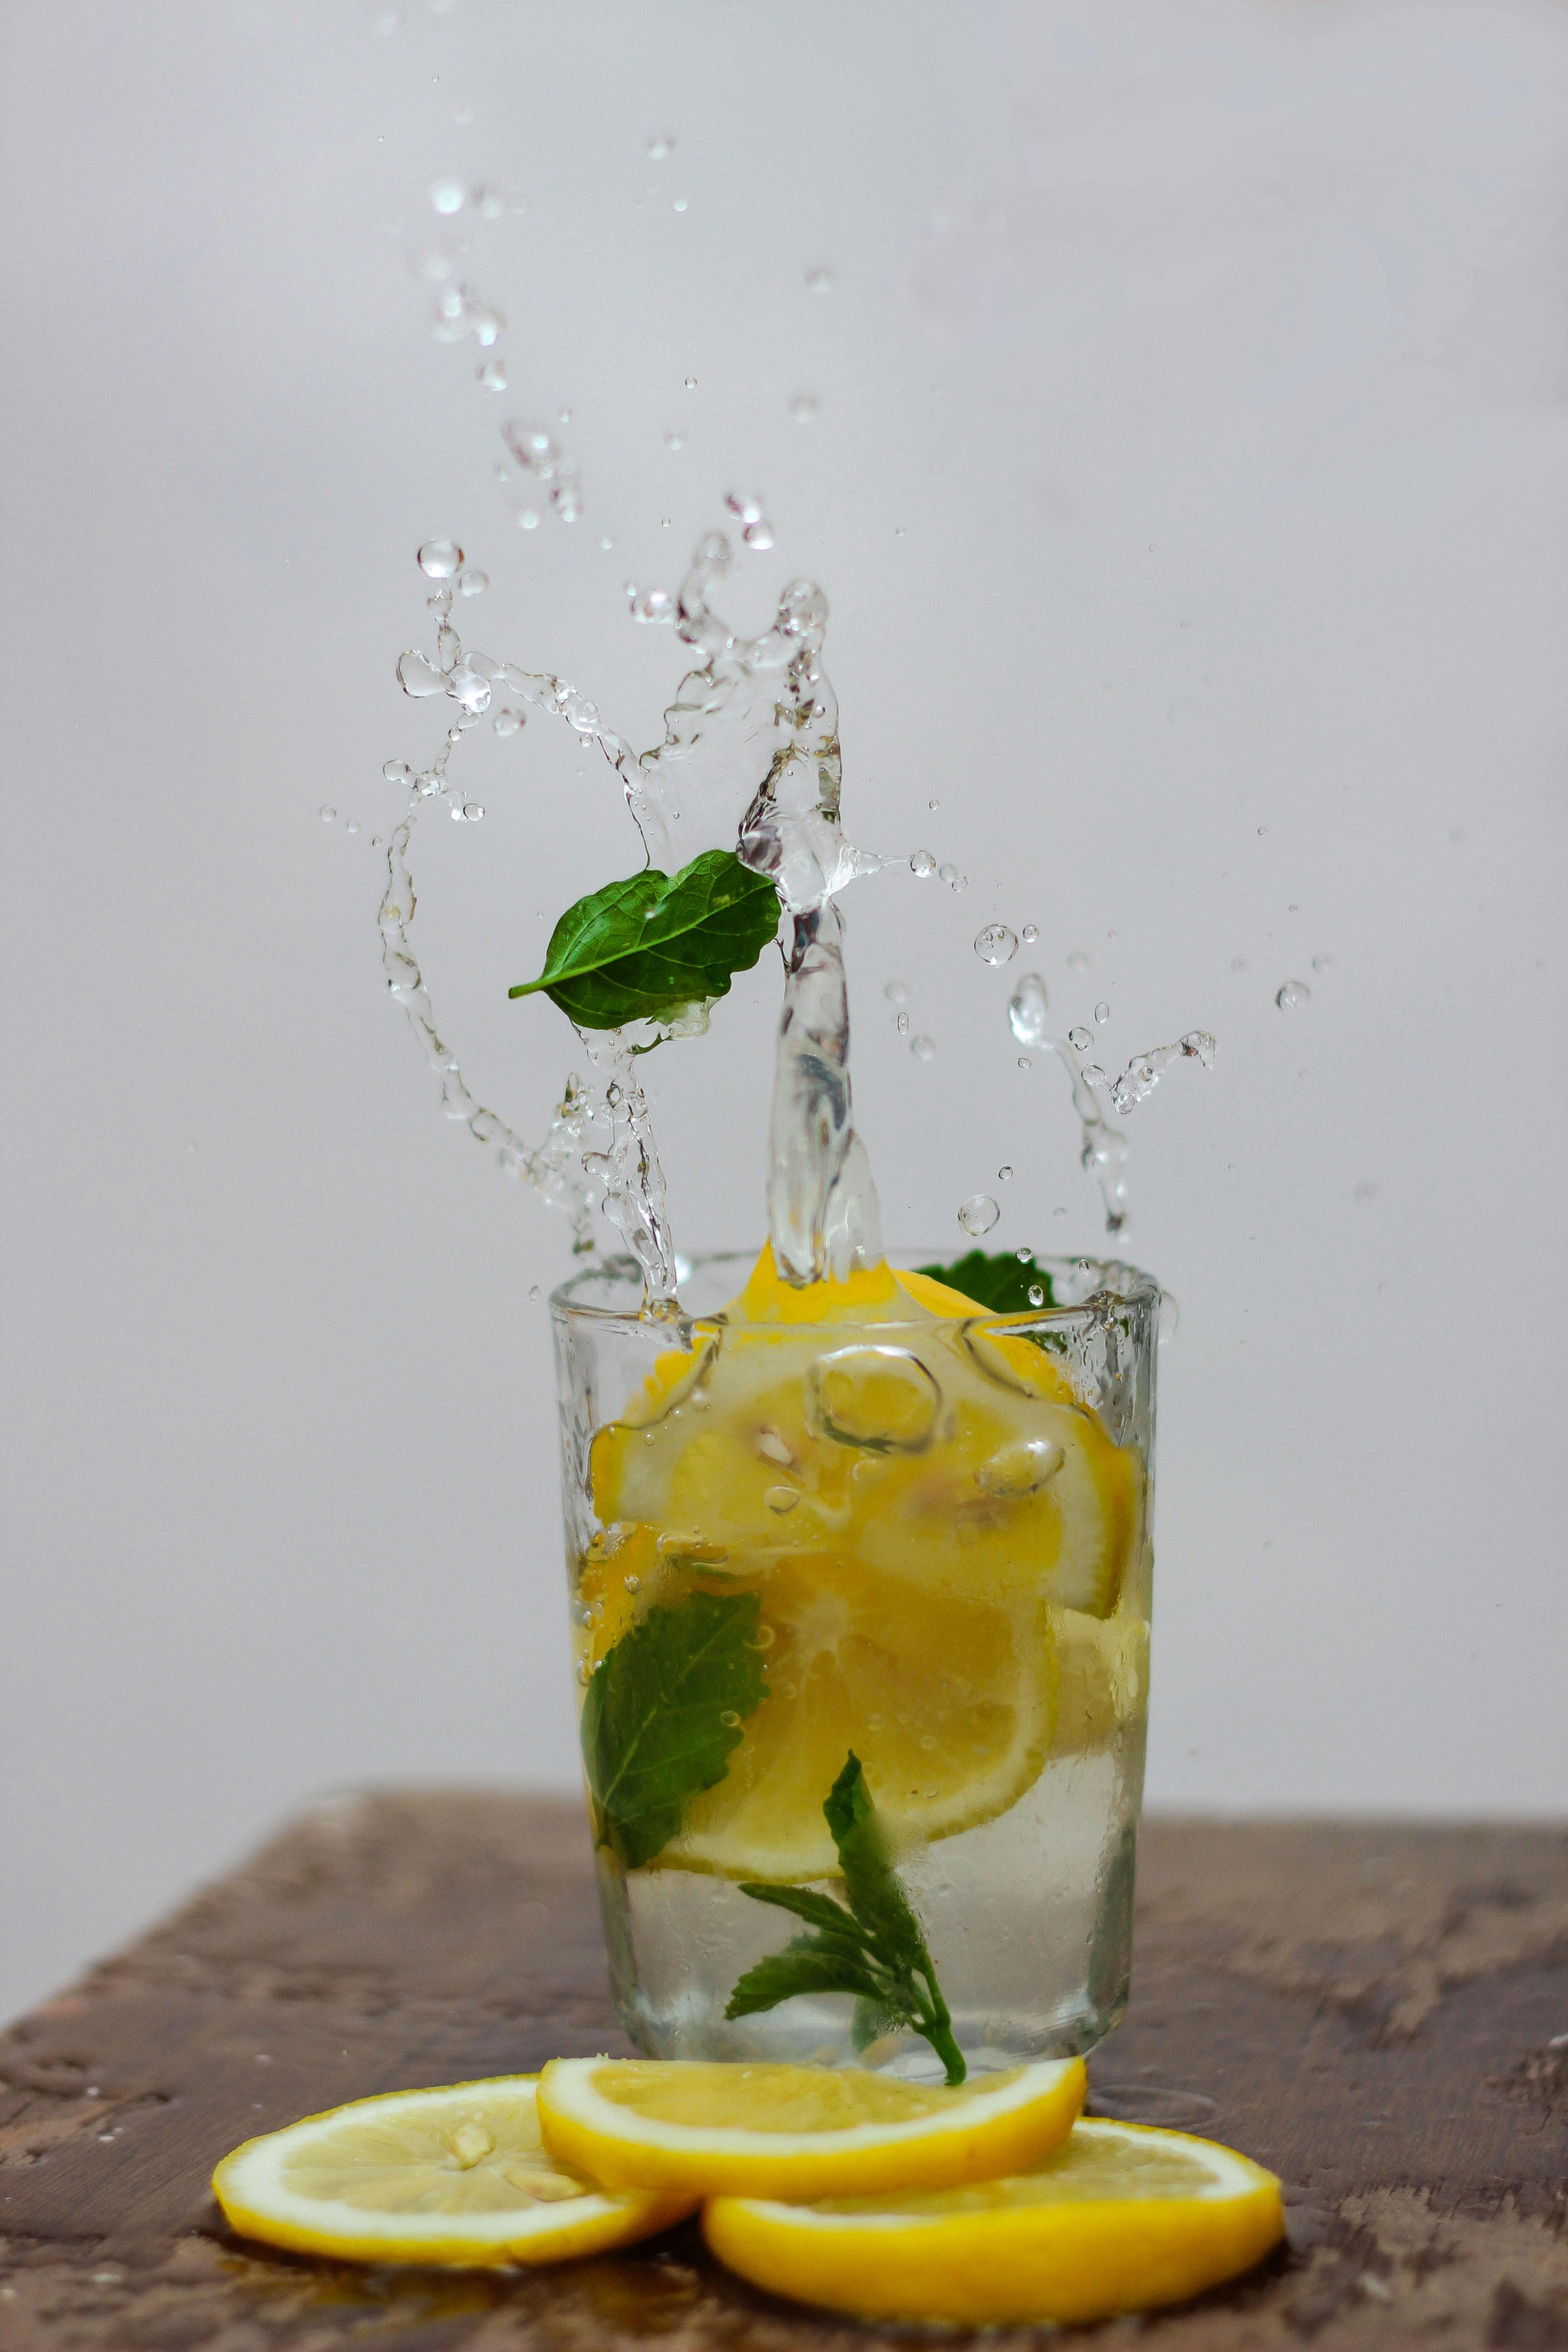 Free Photo of Lemon in Drinking Glass With Water Stock Photo